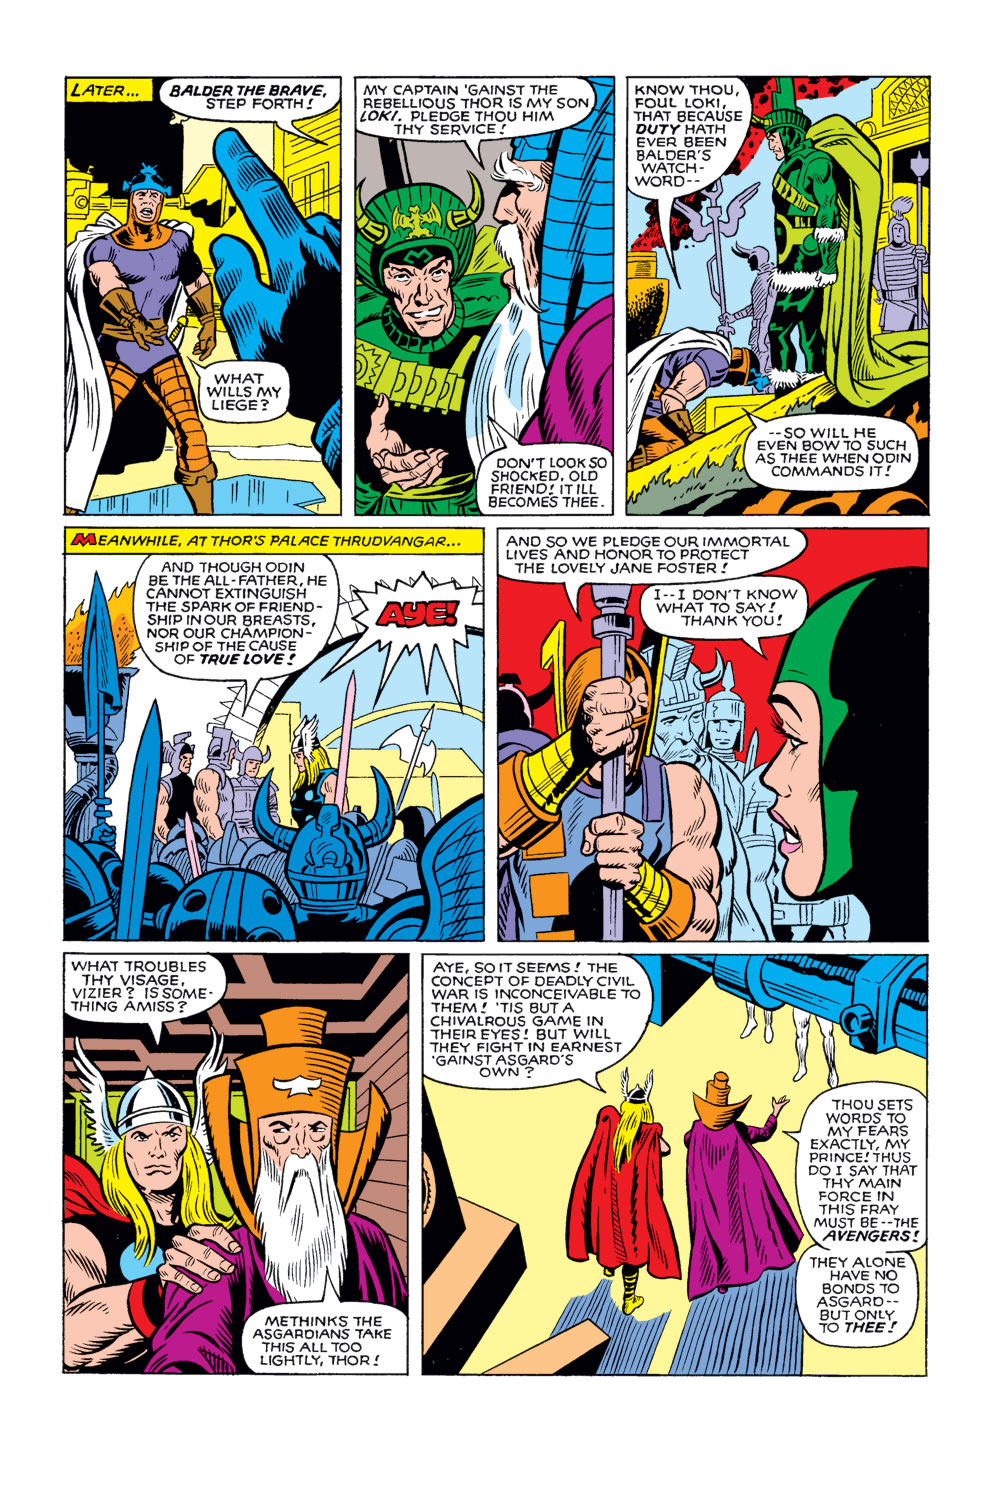 What If? (1977) issue 25 - Thor and the Avengers battled the gods - Page 12